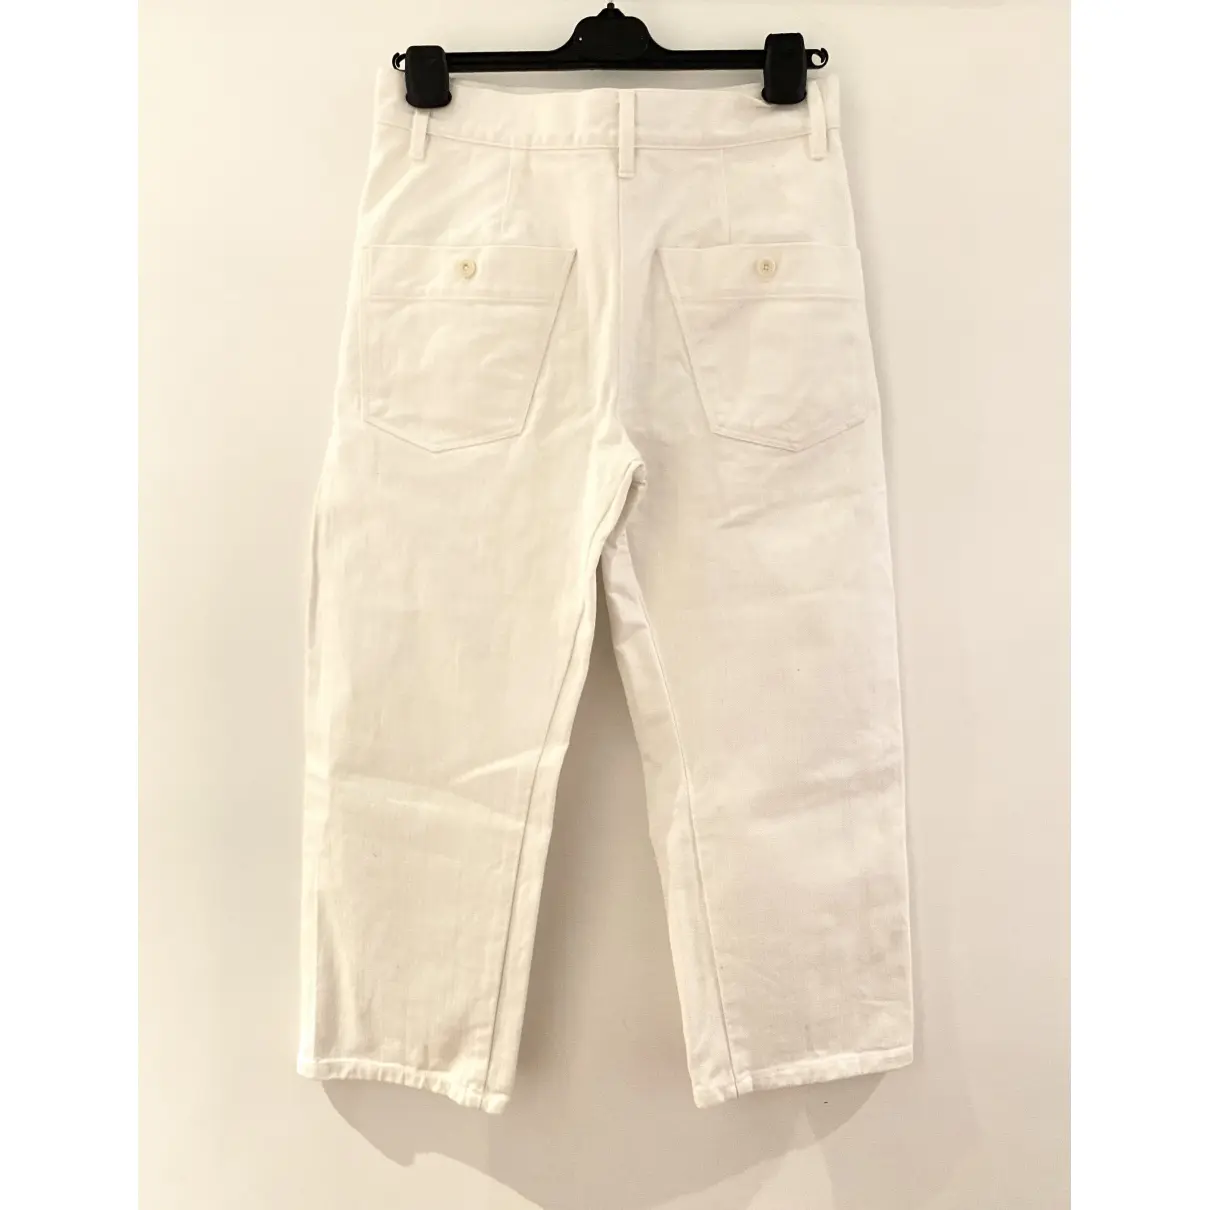 Buy Lemaire Trousers online